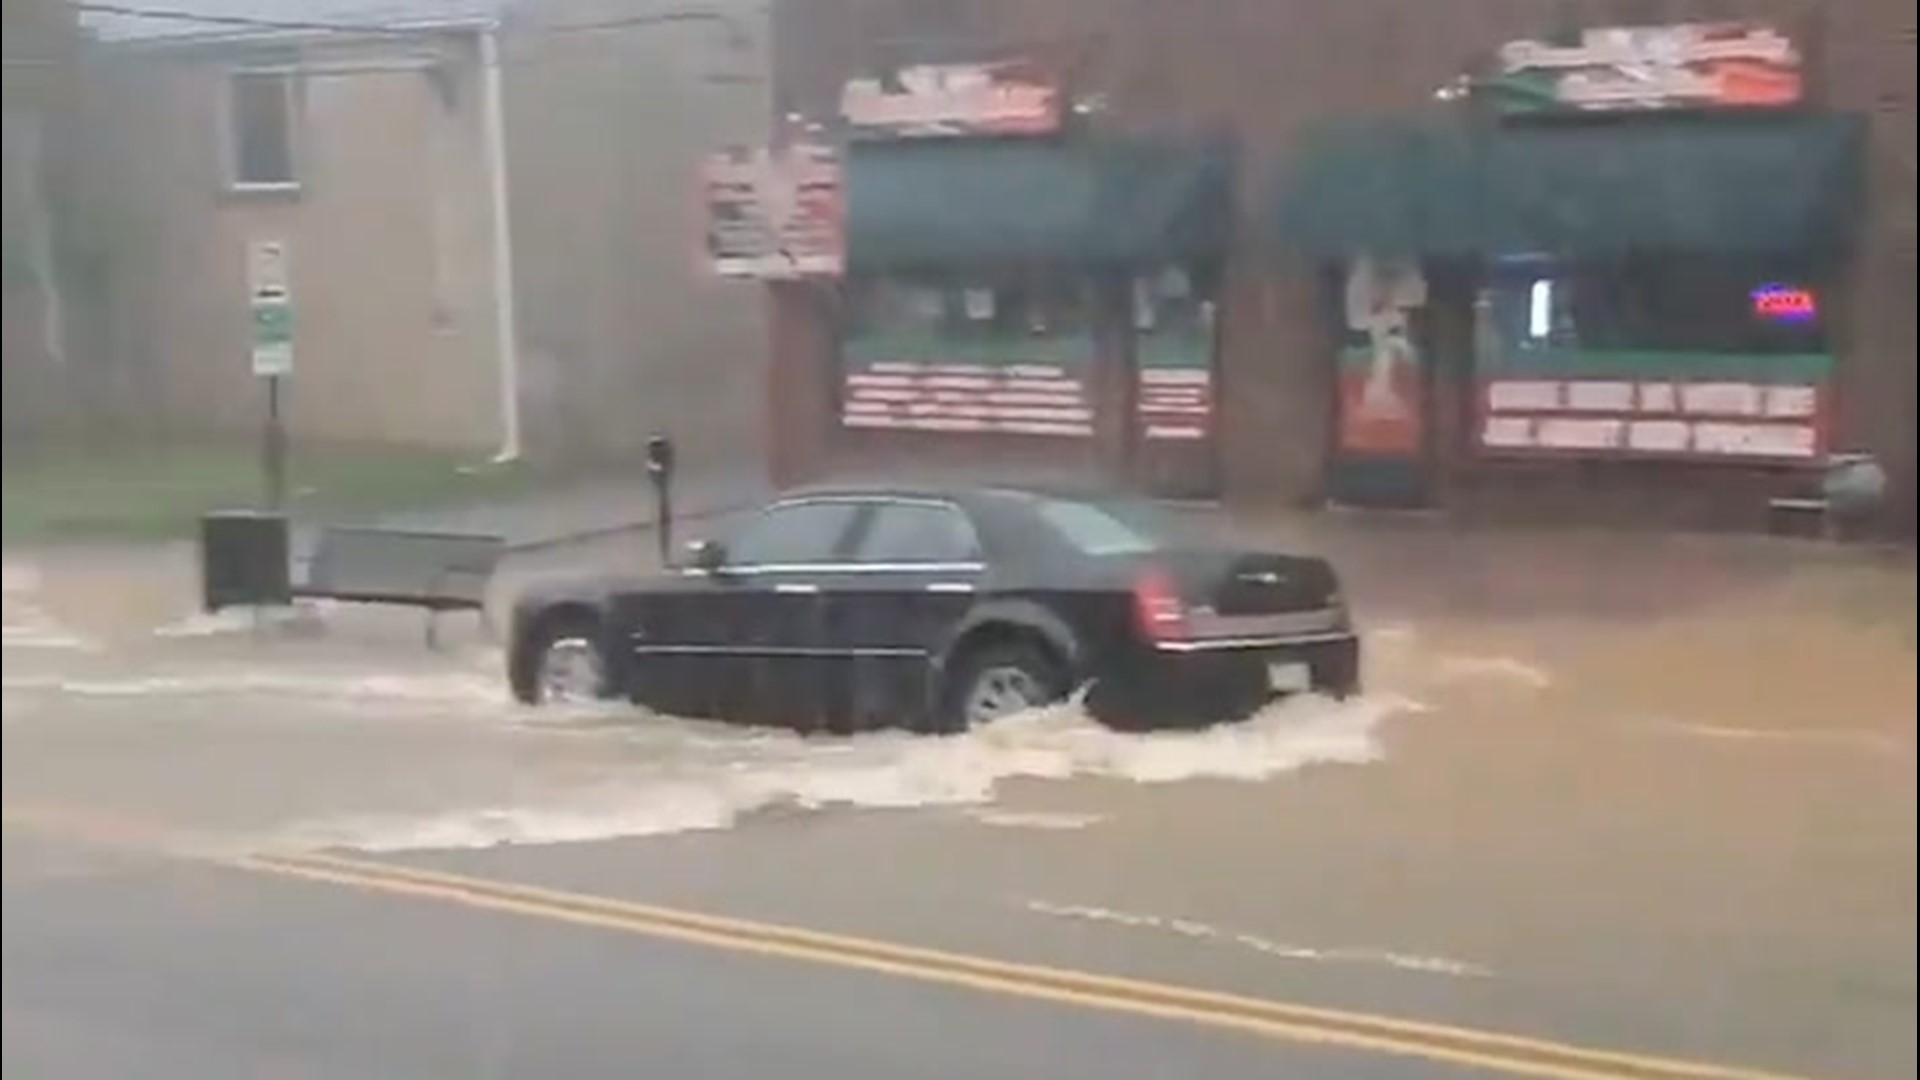 As Isaias trekked up the east coast drenching rain flooded streets in Bridgeport, Pennsylvania, on Aug. 4.